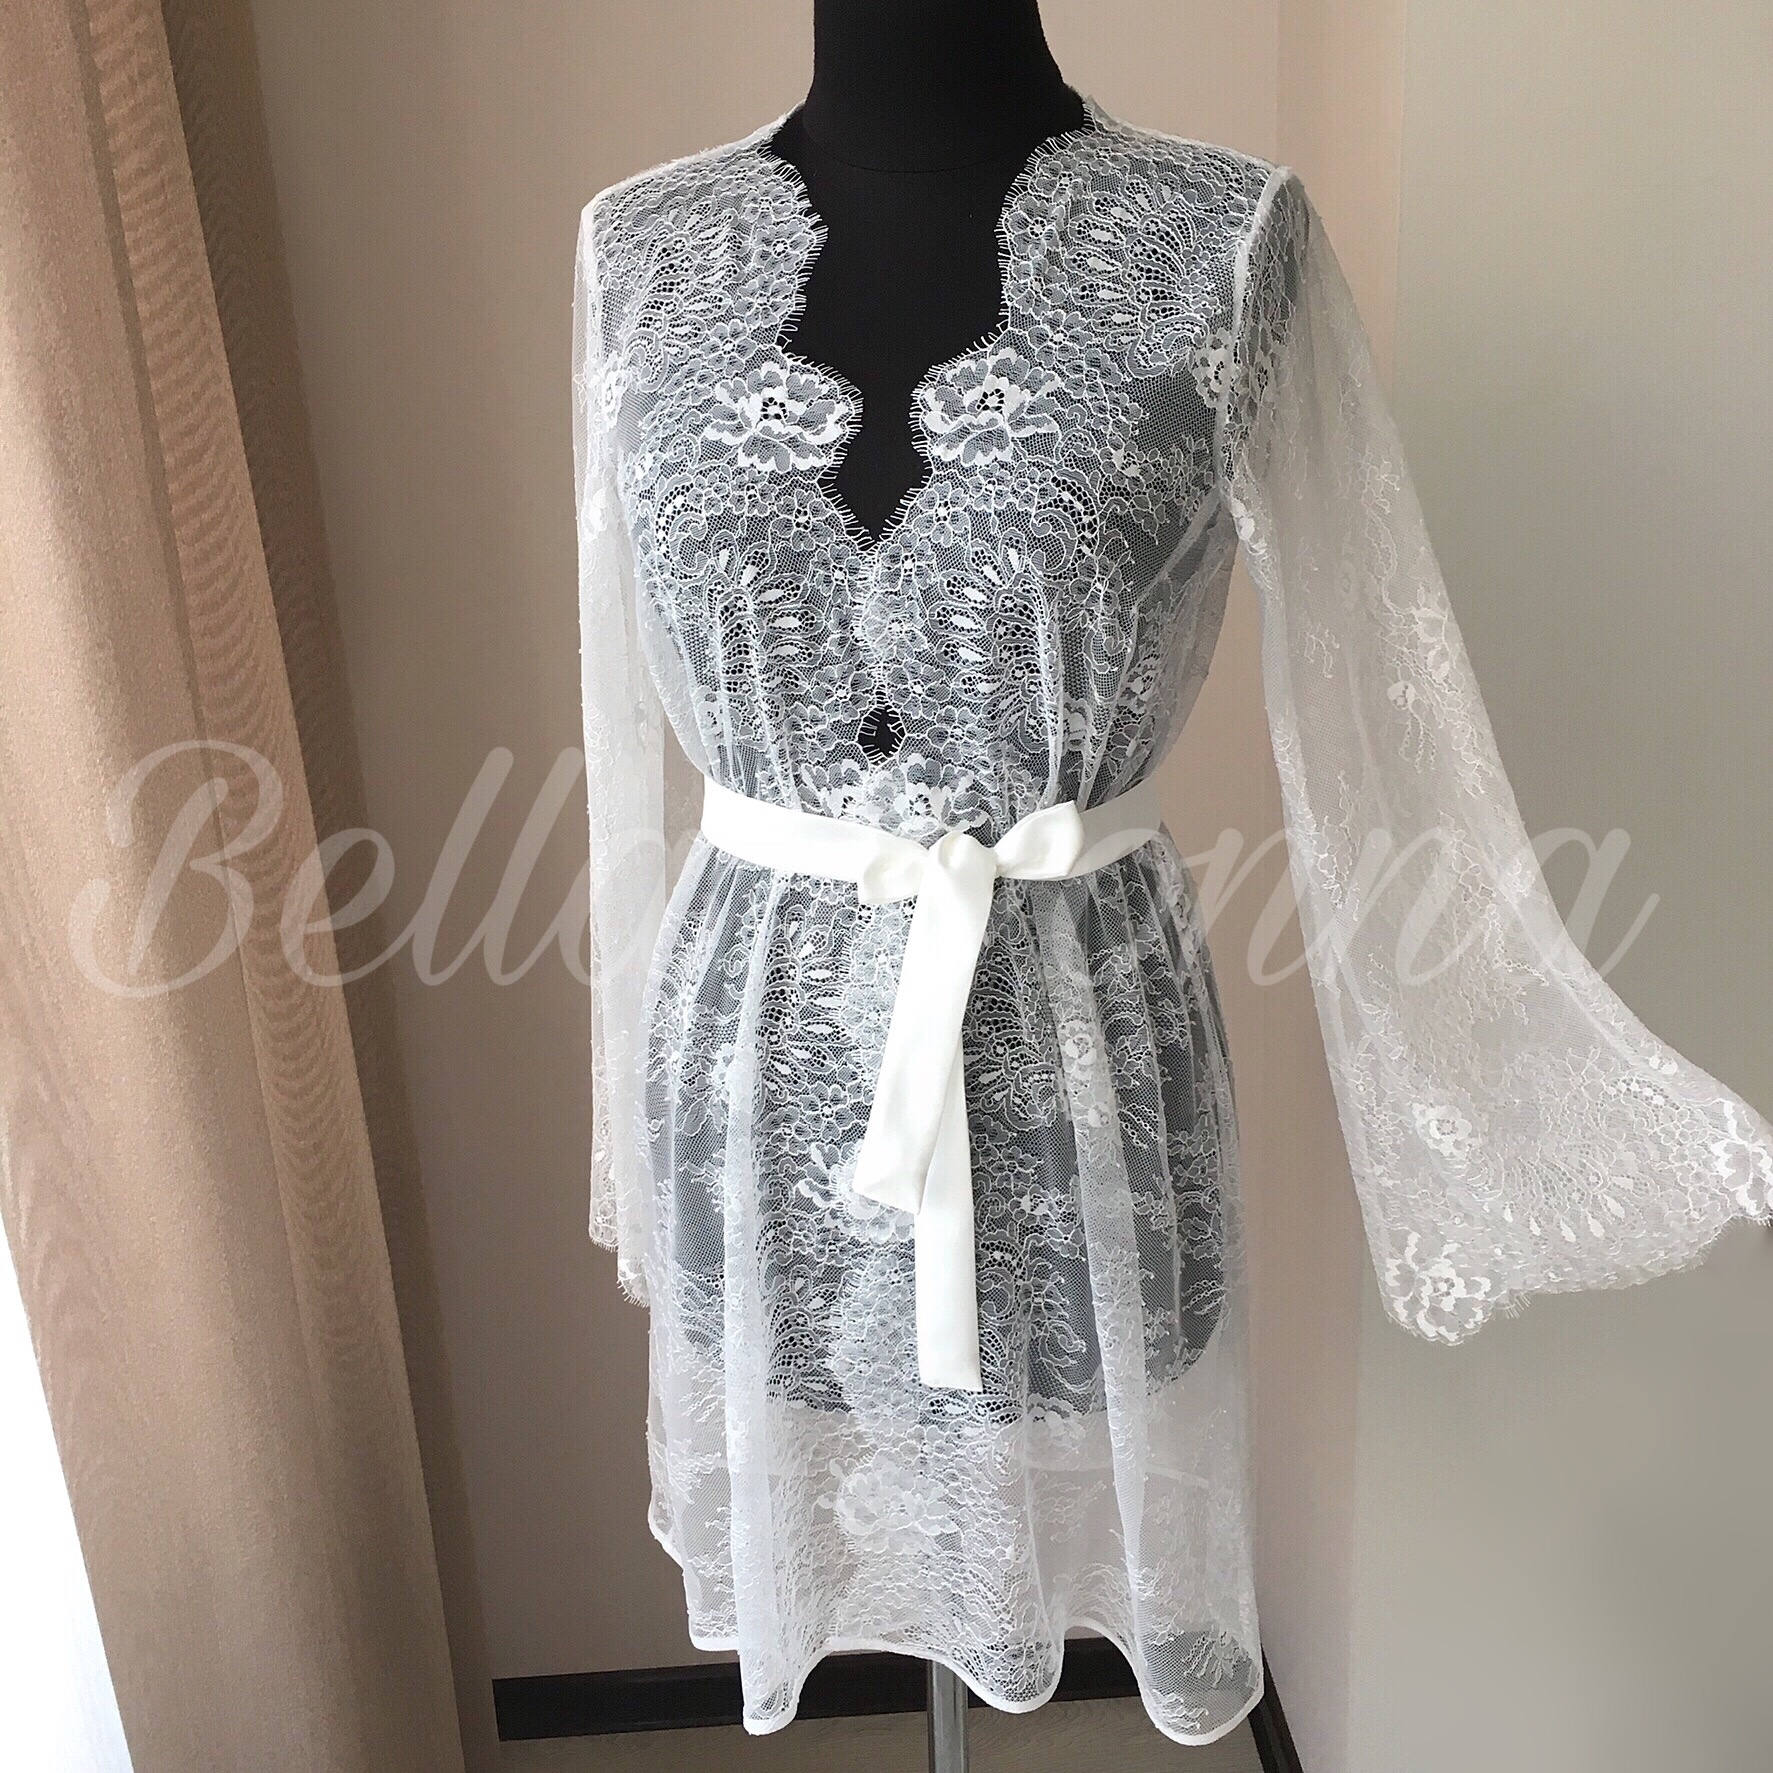 Bridal lace robe, Chantilly lace,  white lace robe, bride robe, bridal robes, ivory lace robe, Lace Bridal Robe, lace dress, for bride